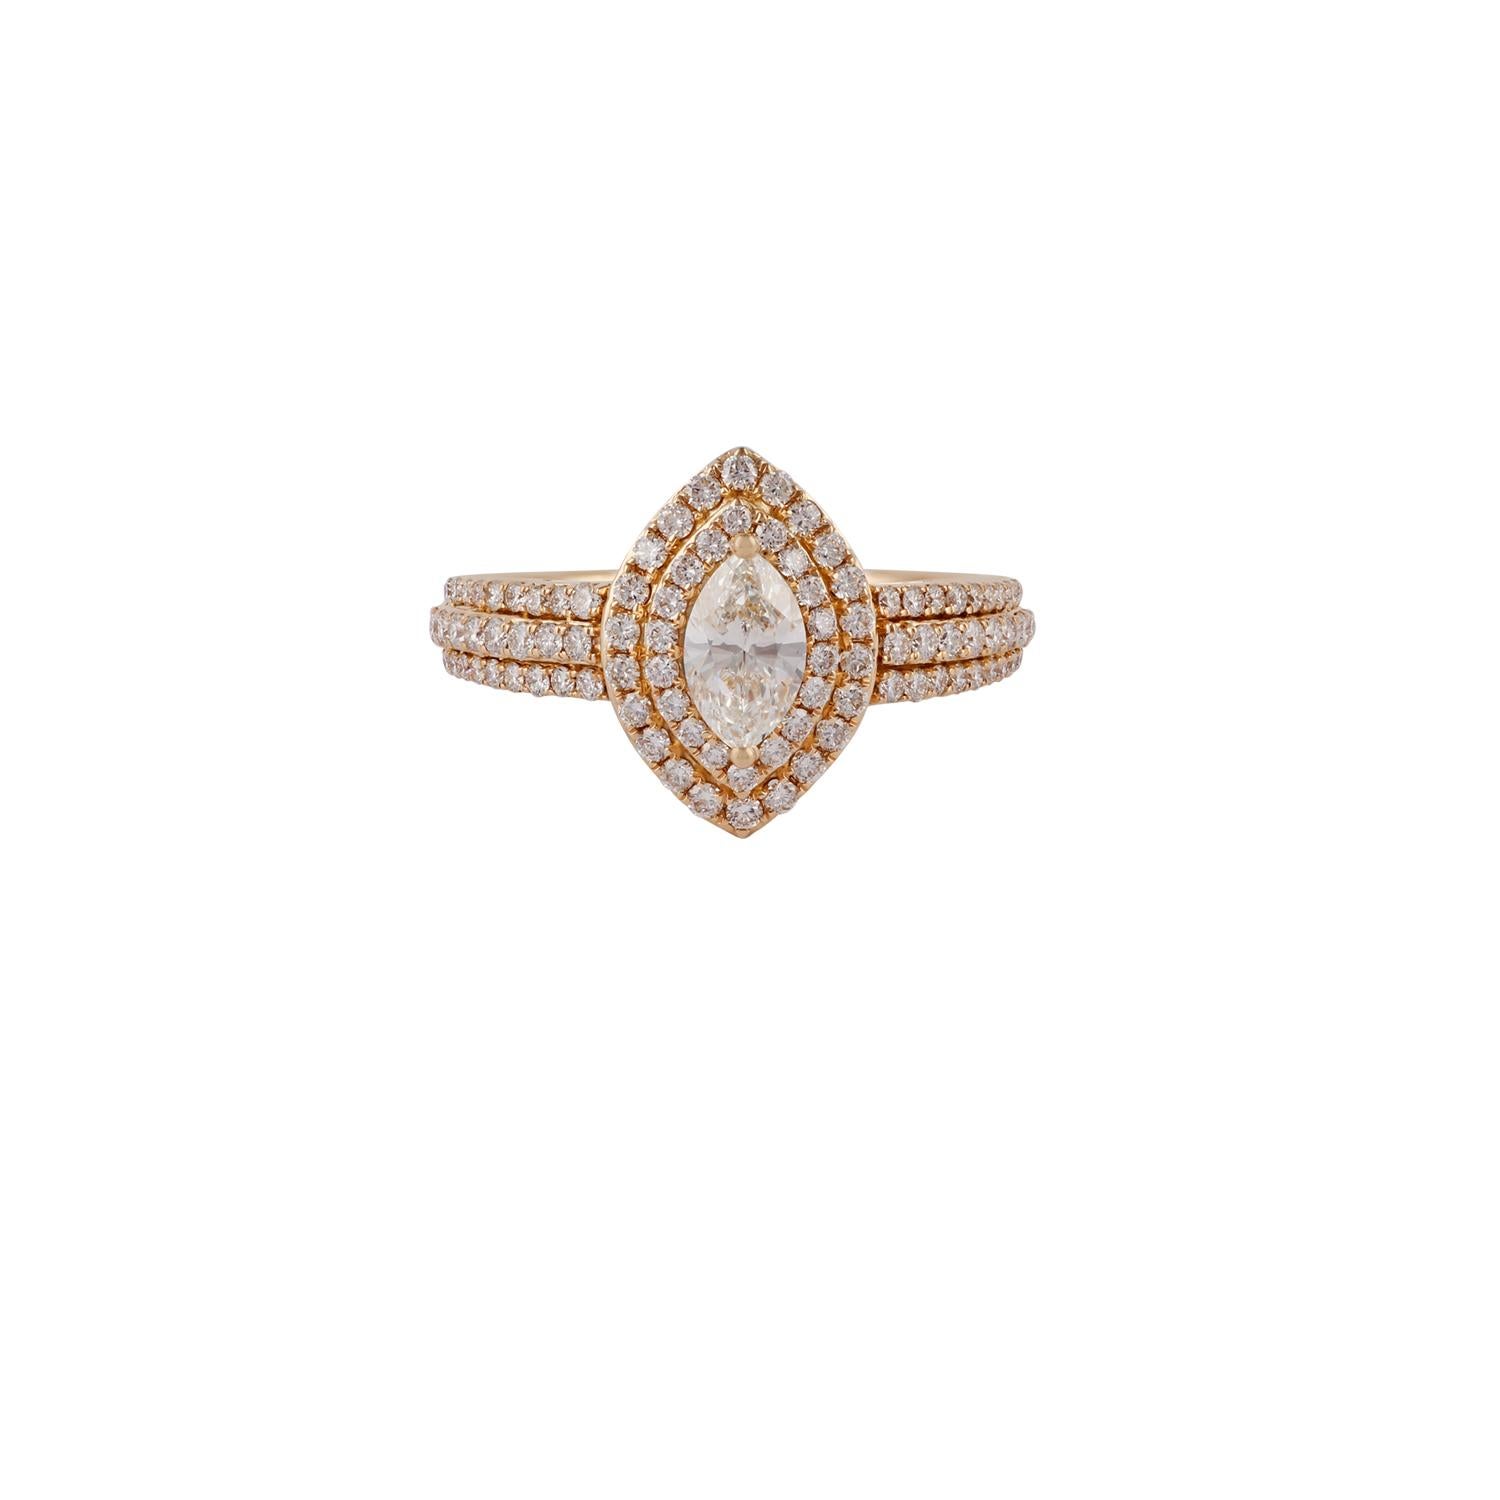 Its an elegant ring studded in 18k yellow gold with 1 marquise shaped diamond weight 0.57 carat & 92 round shaped diamond weight 0.77 carat, this entire ring studded in 18k yellow gold weight 5.43 grams, ring size can be change as per the